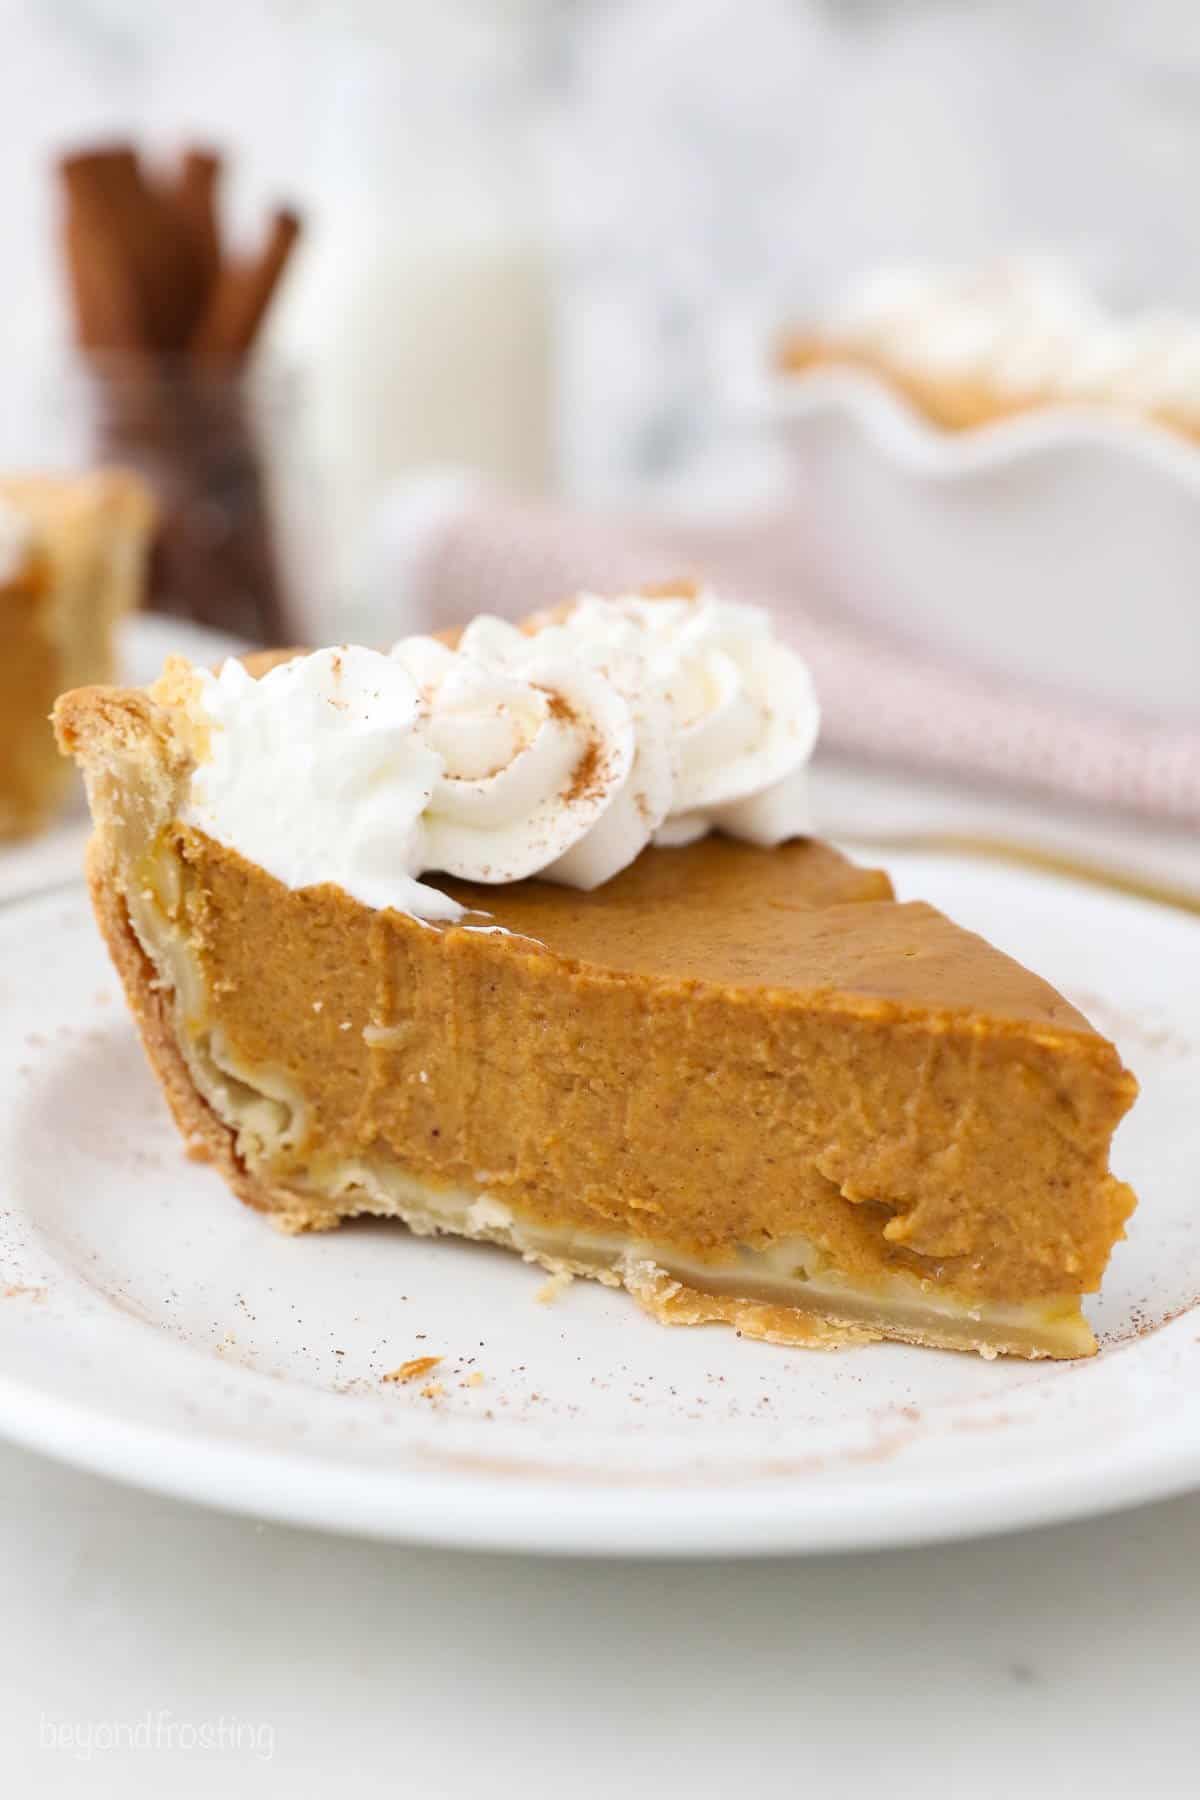 A slice of Pumpkin Pie with Homemade Whipped Cream.